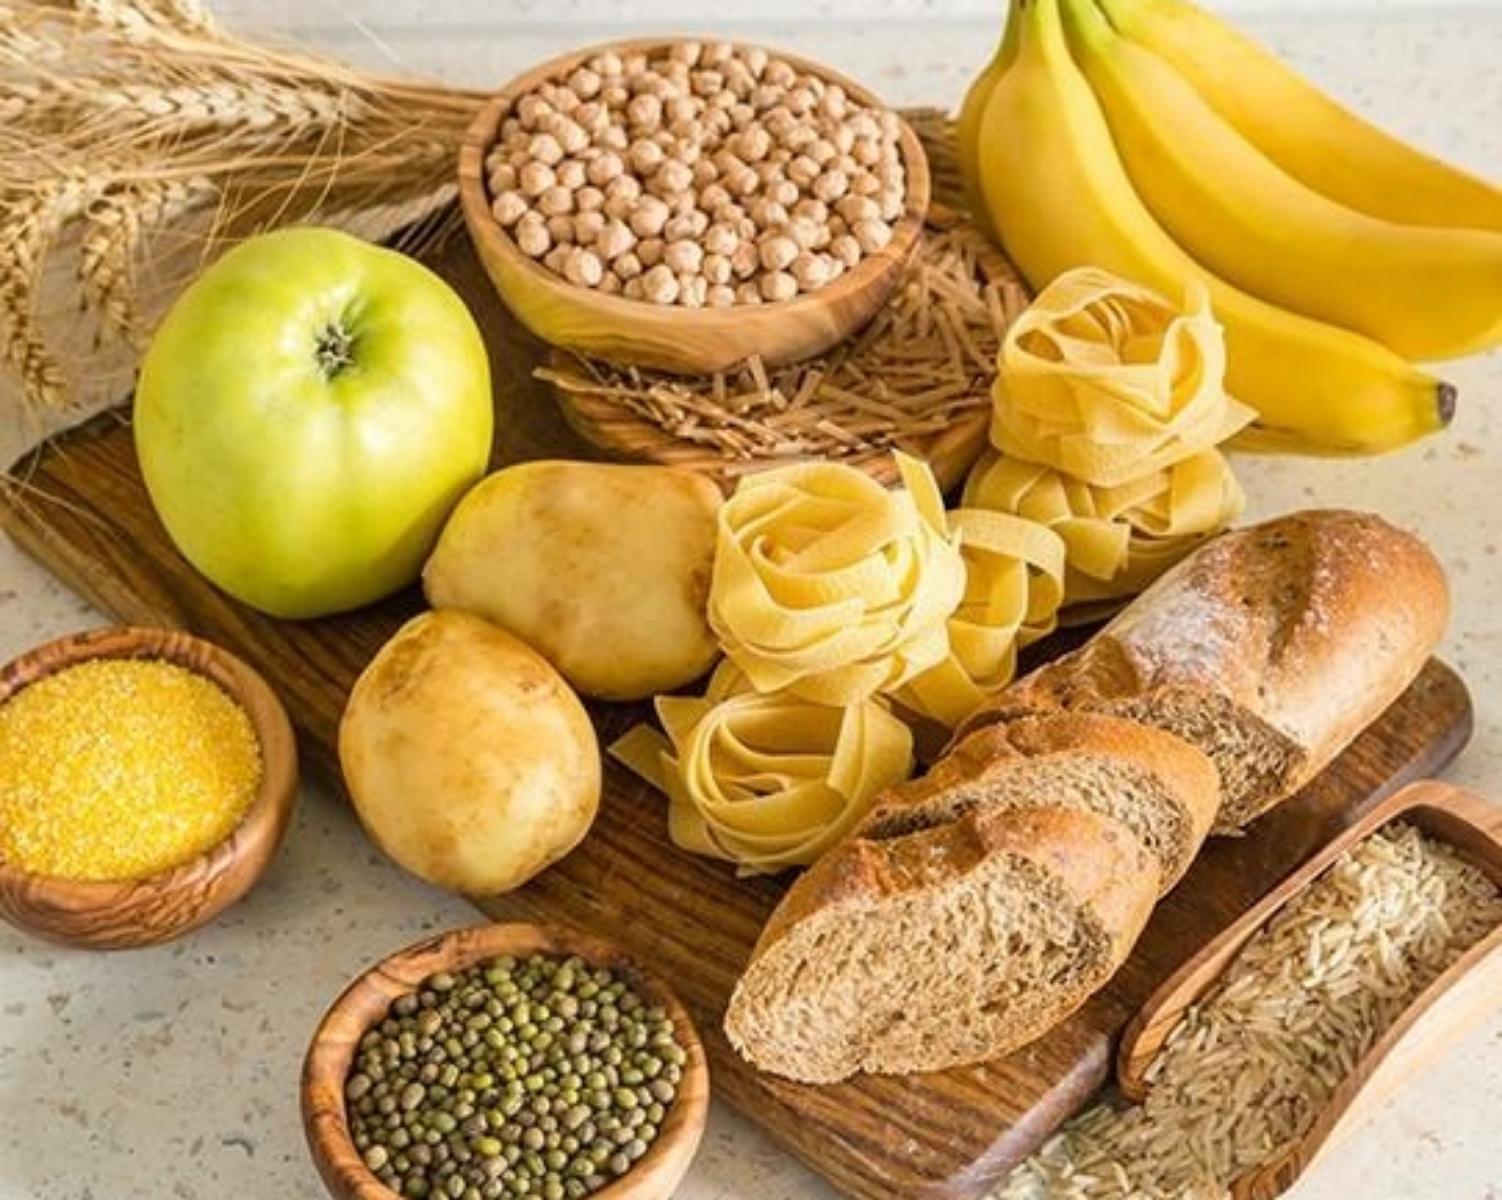 2. Base your diet on plenty of foods rich in carbohydrates